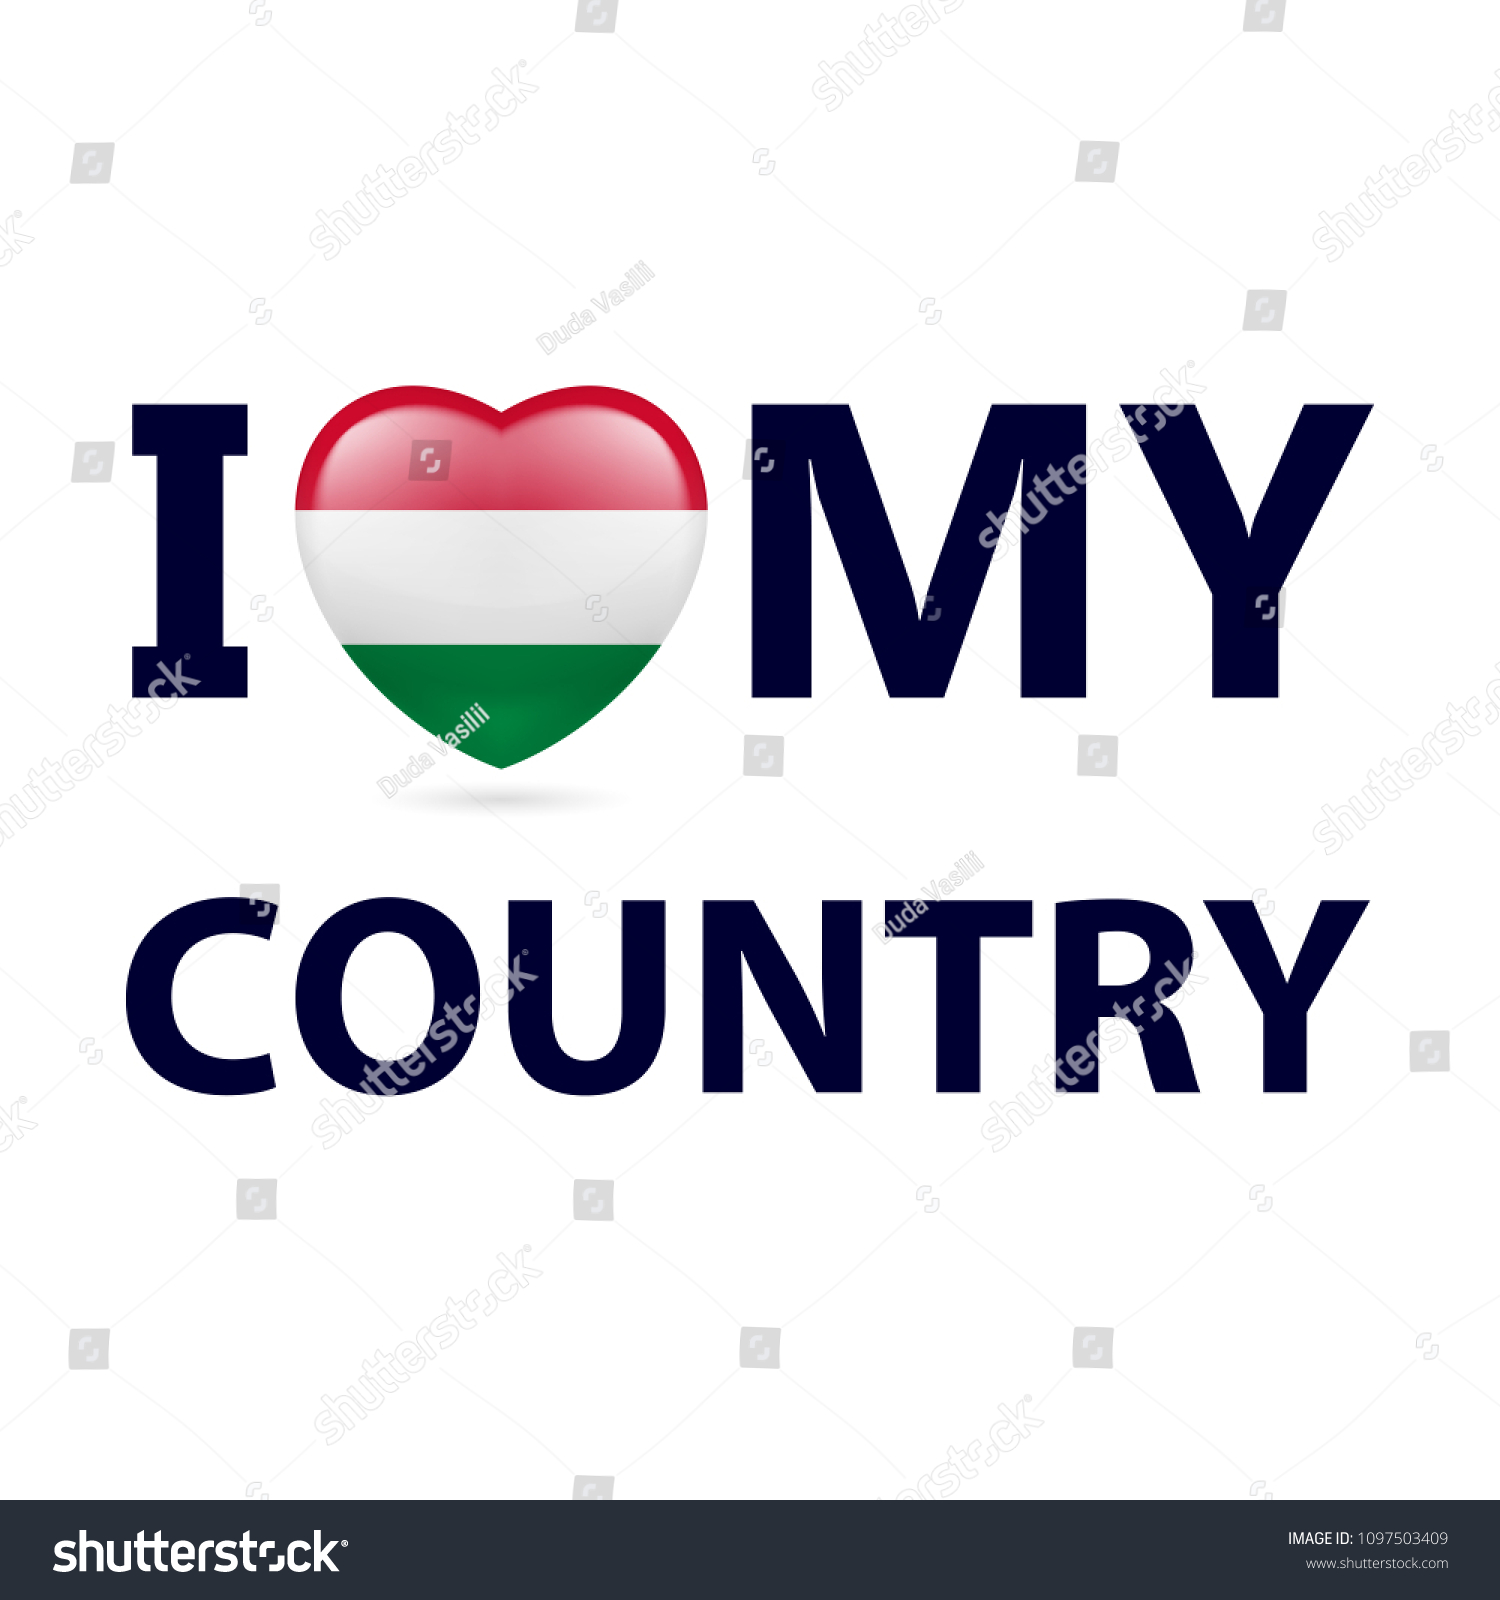 Heart Hungarian Flag Colors Love My Stock Vector Royalty Free 1097503409